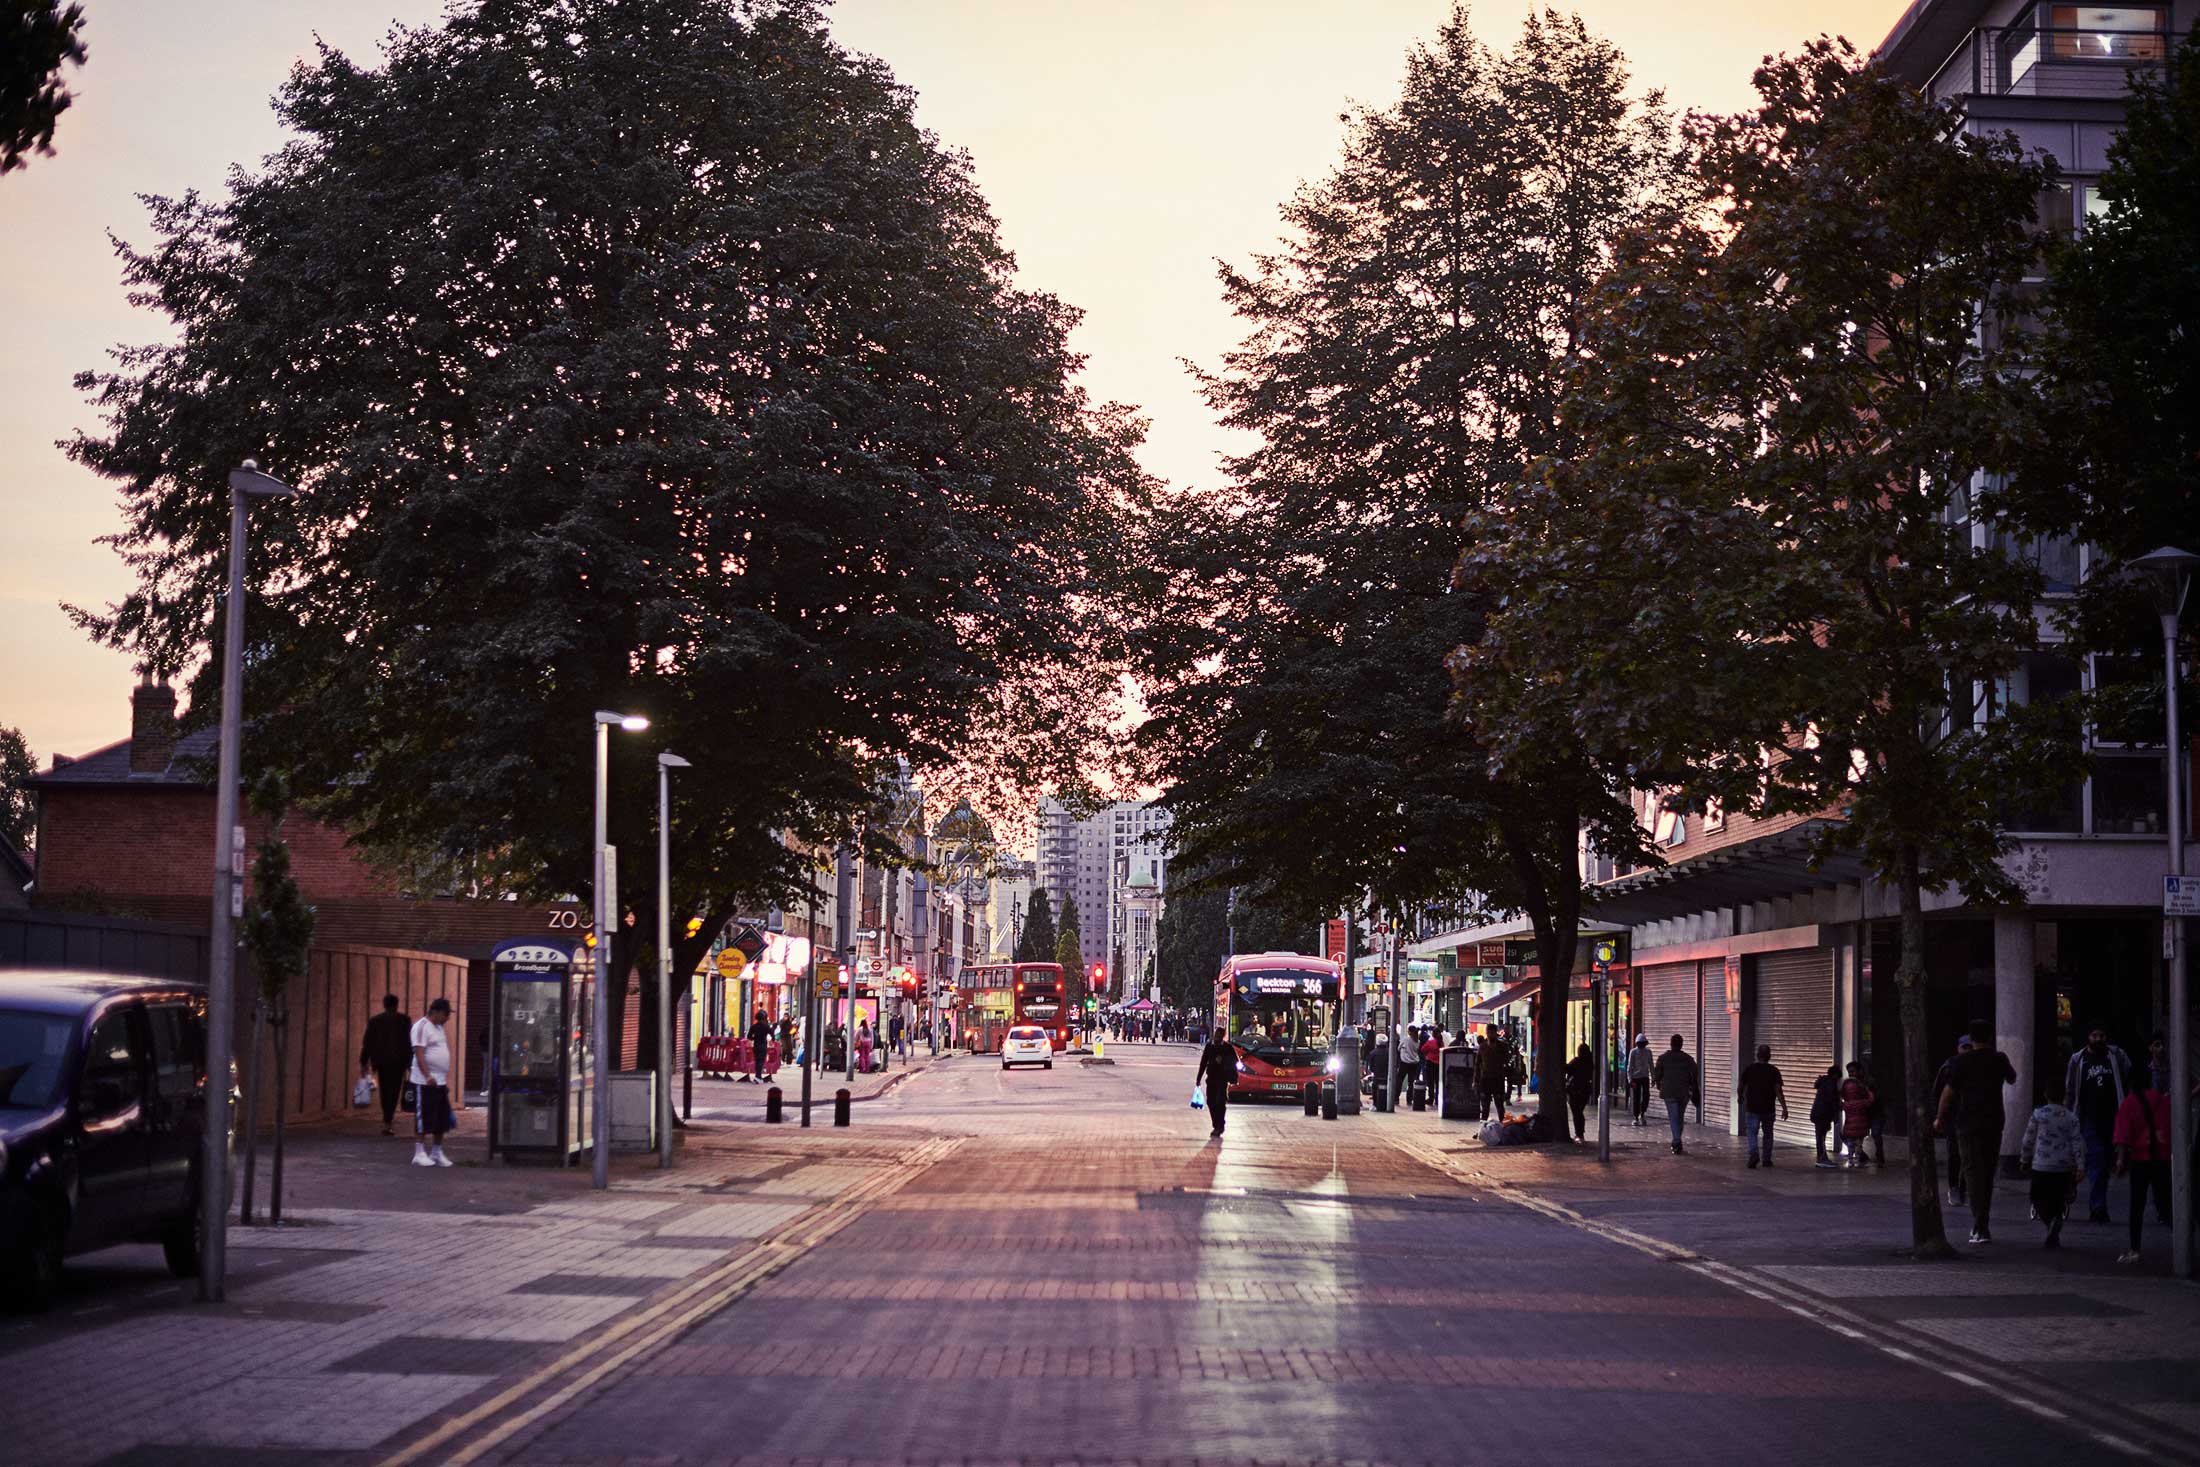 High street at sunset - Ilford - Beresfords Estate agents - Essex